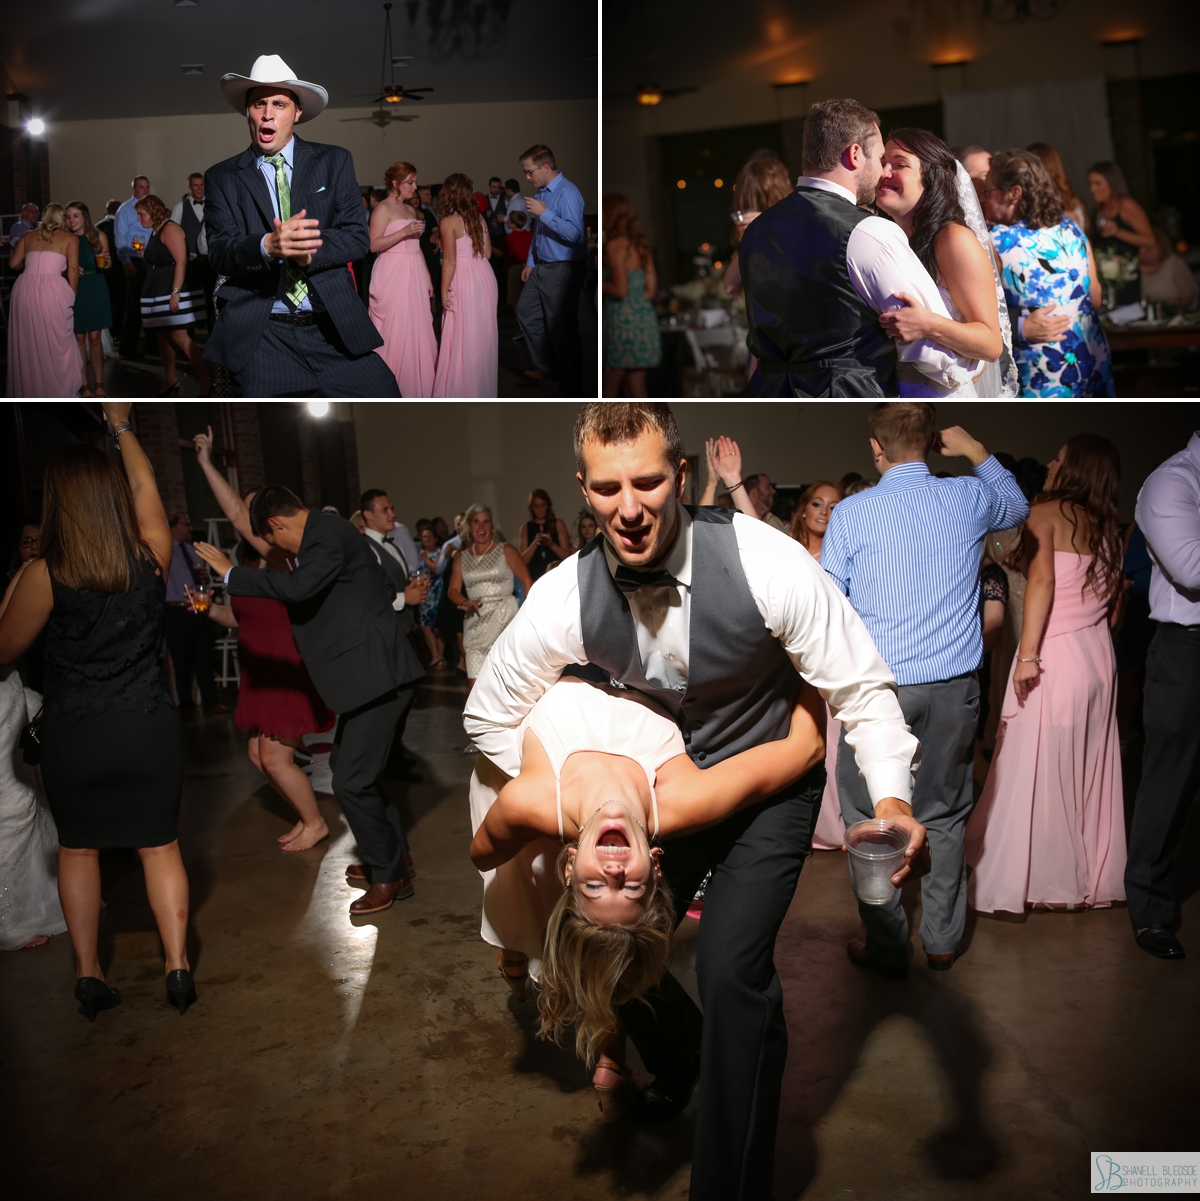 Wedding guests dancing at Hunter Valley Farm Pavilion in Knoxville